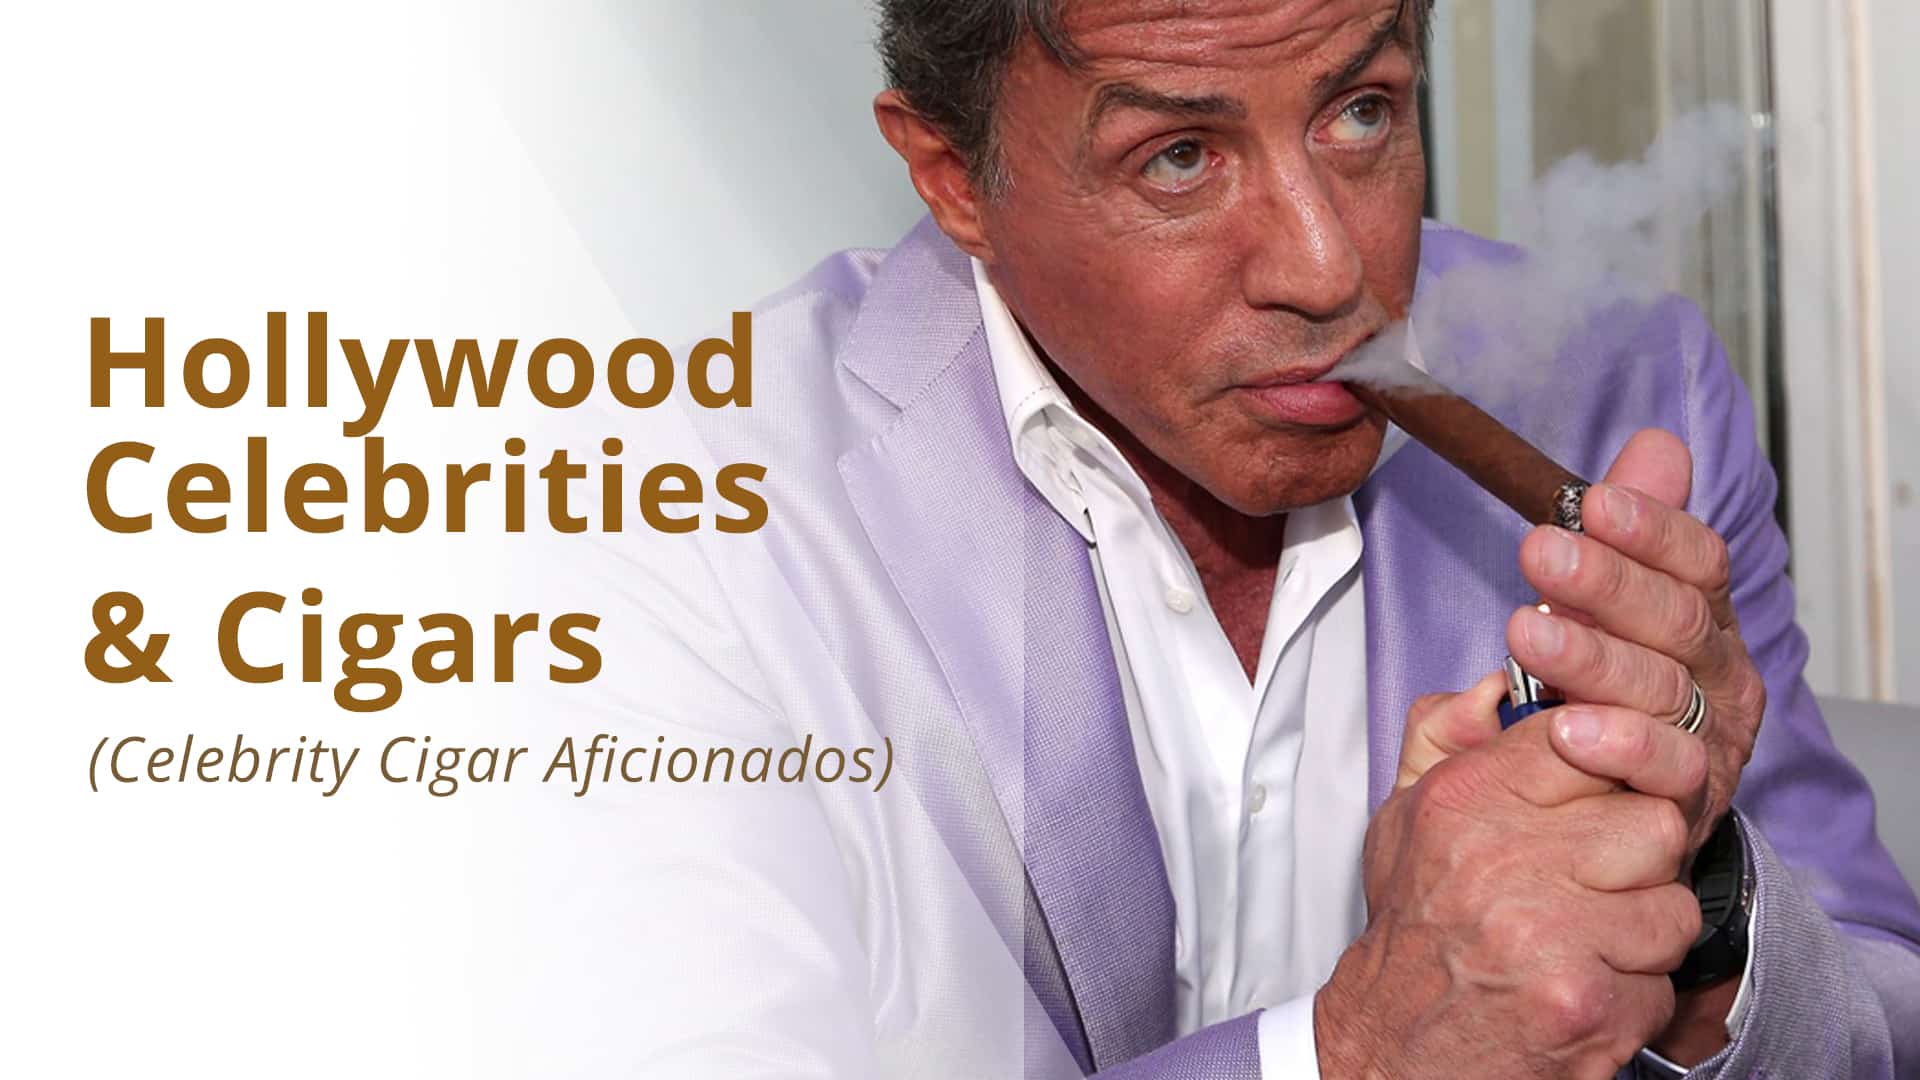 Hollywood celebrities and their favorite cigars